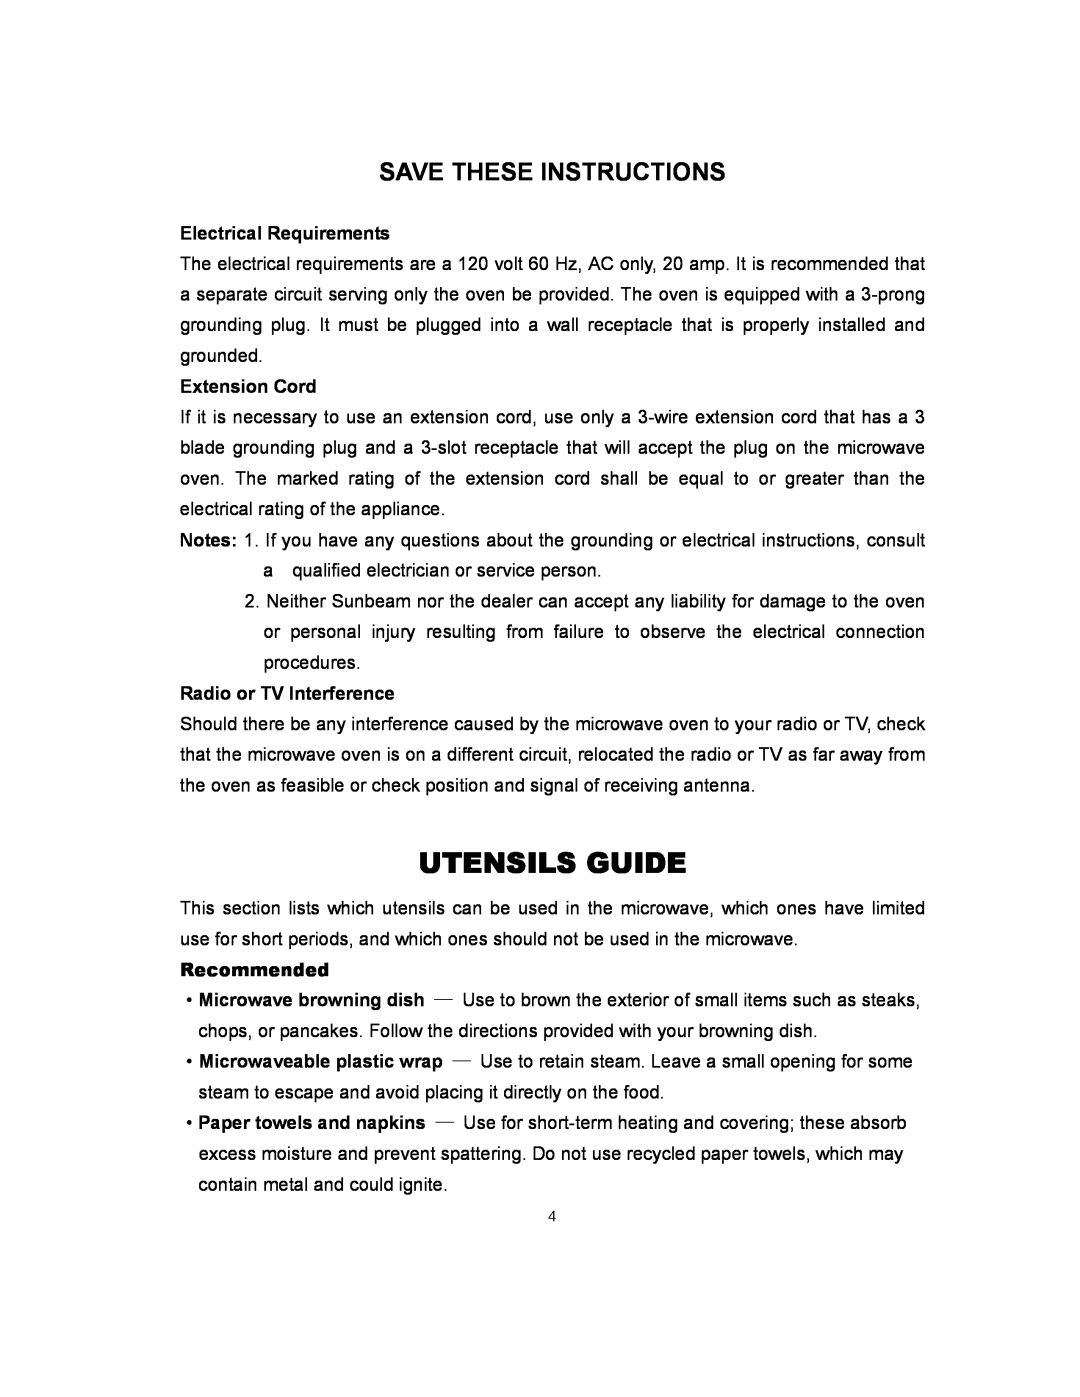 Sunbeam SMW978 Utensils Guide, Save These Instructions, Electrical Requirements, Extension Cord, Radio or TV Interference 